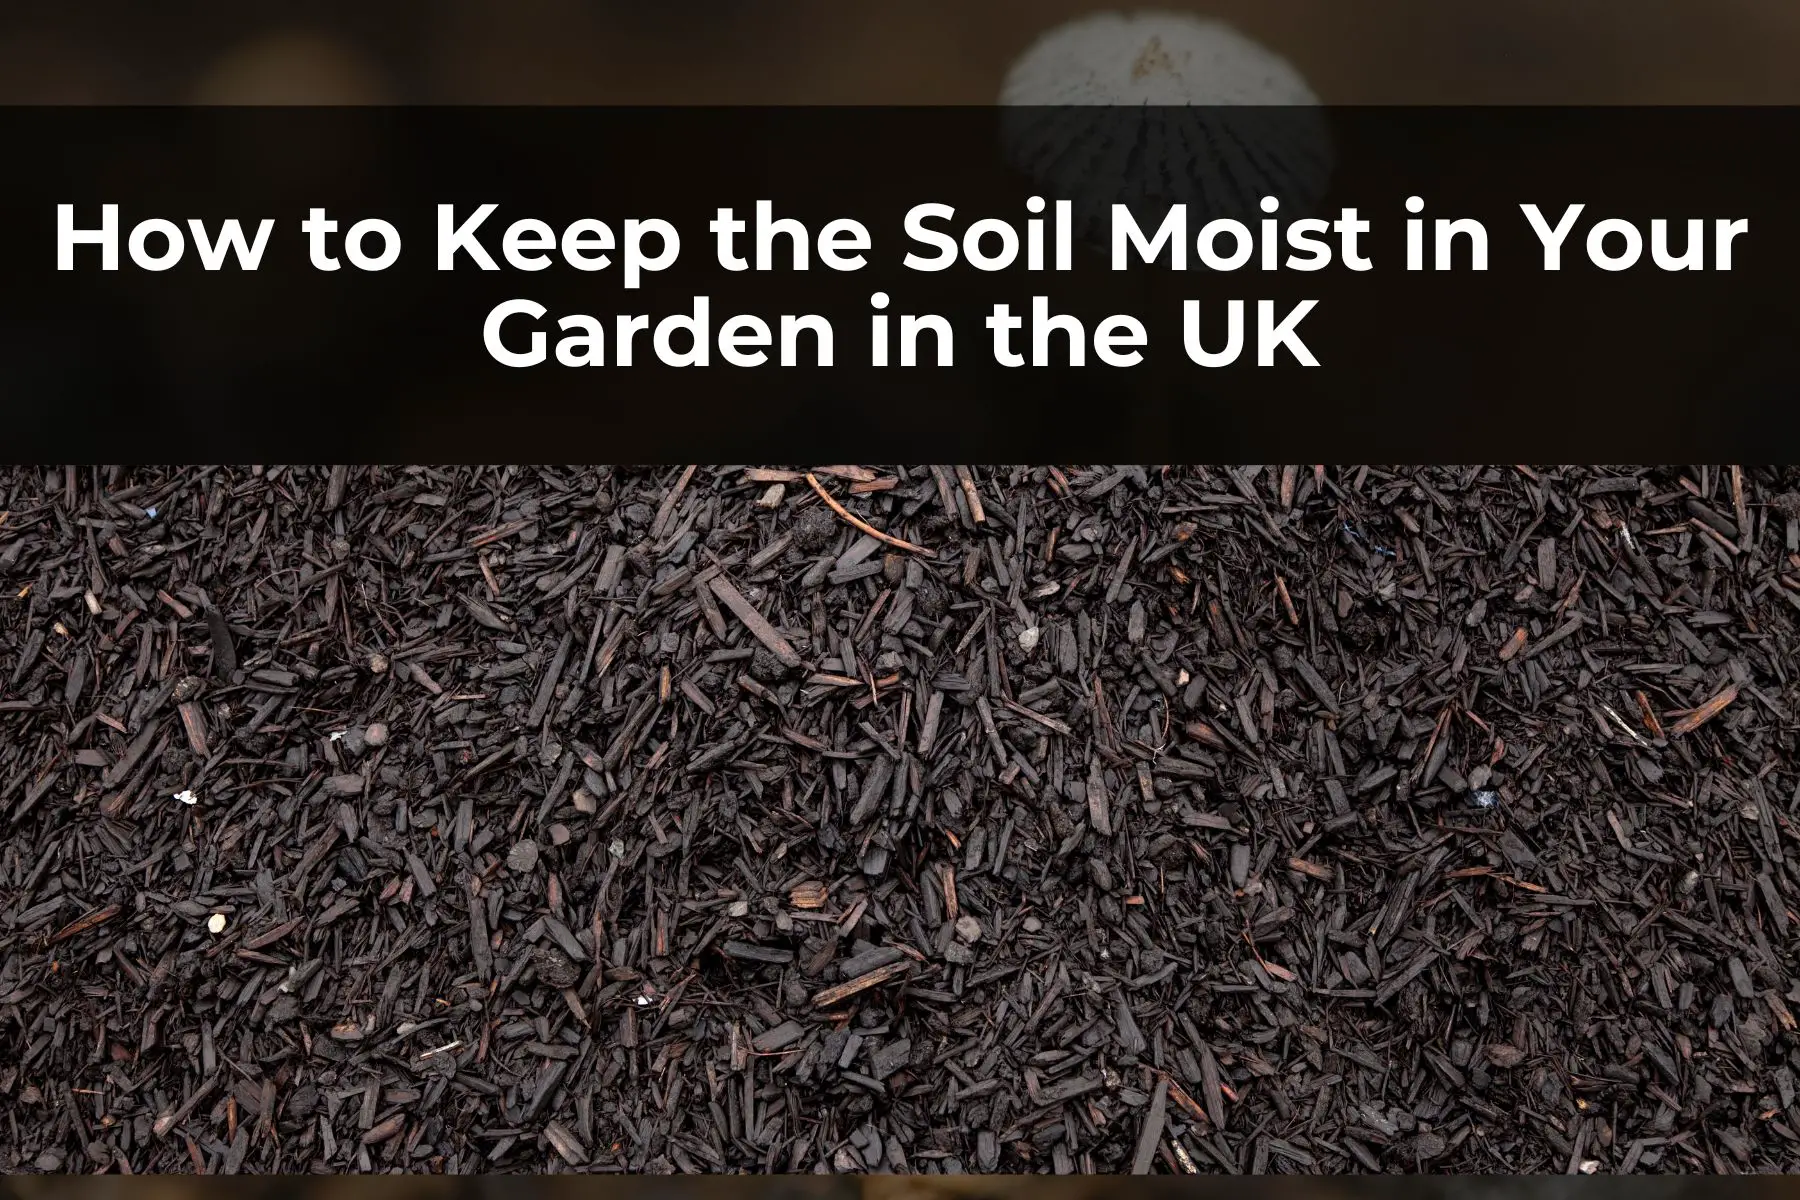 How to Keep the Soil Moist in Your Garden in the UK